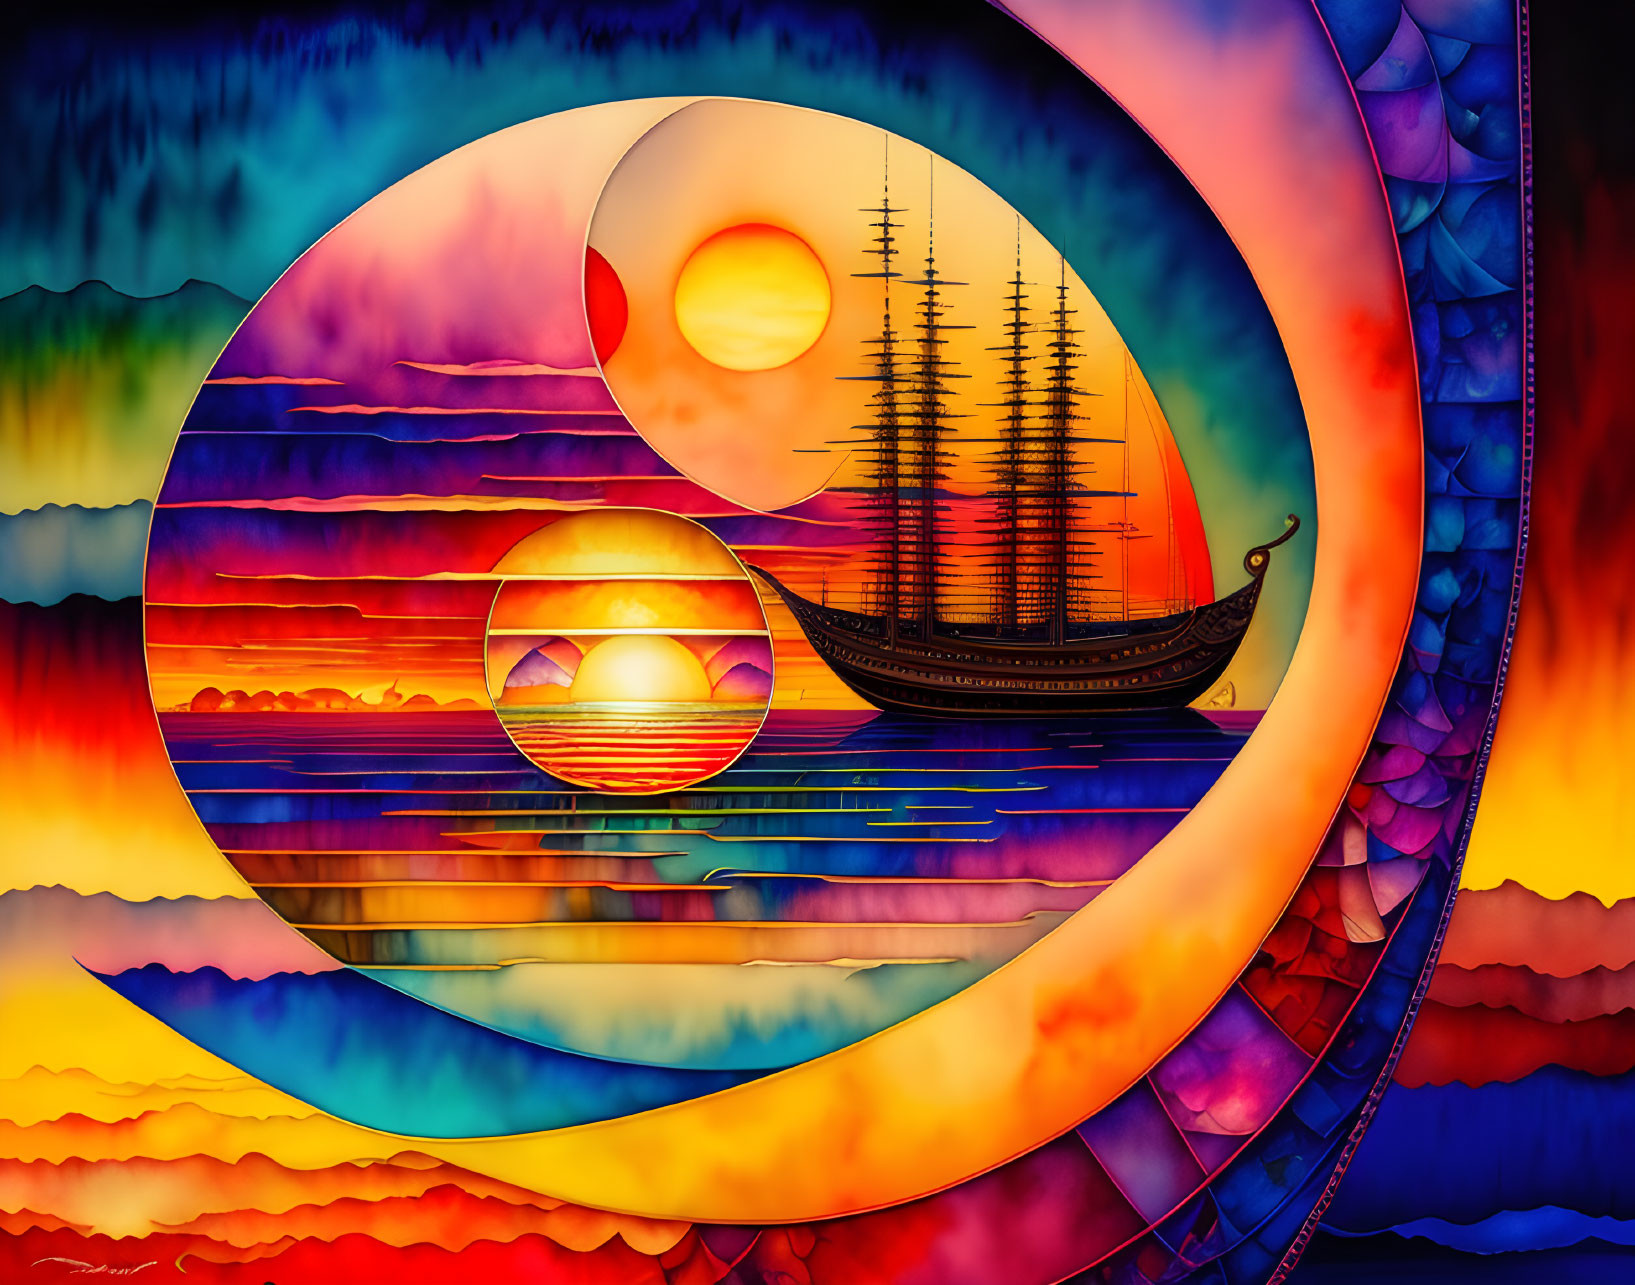 Colorful Psychedelic Artwork: Ship on Water in Circular Patterns